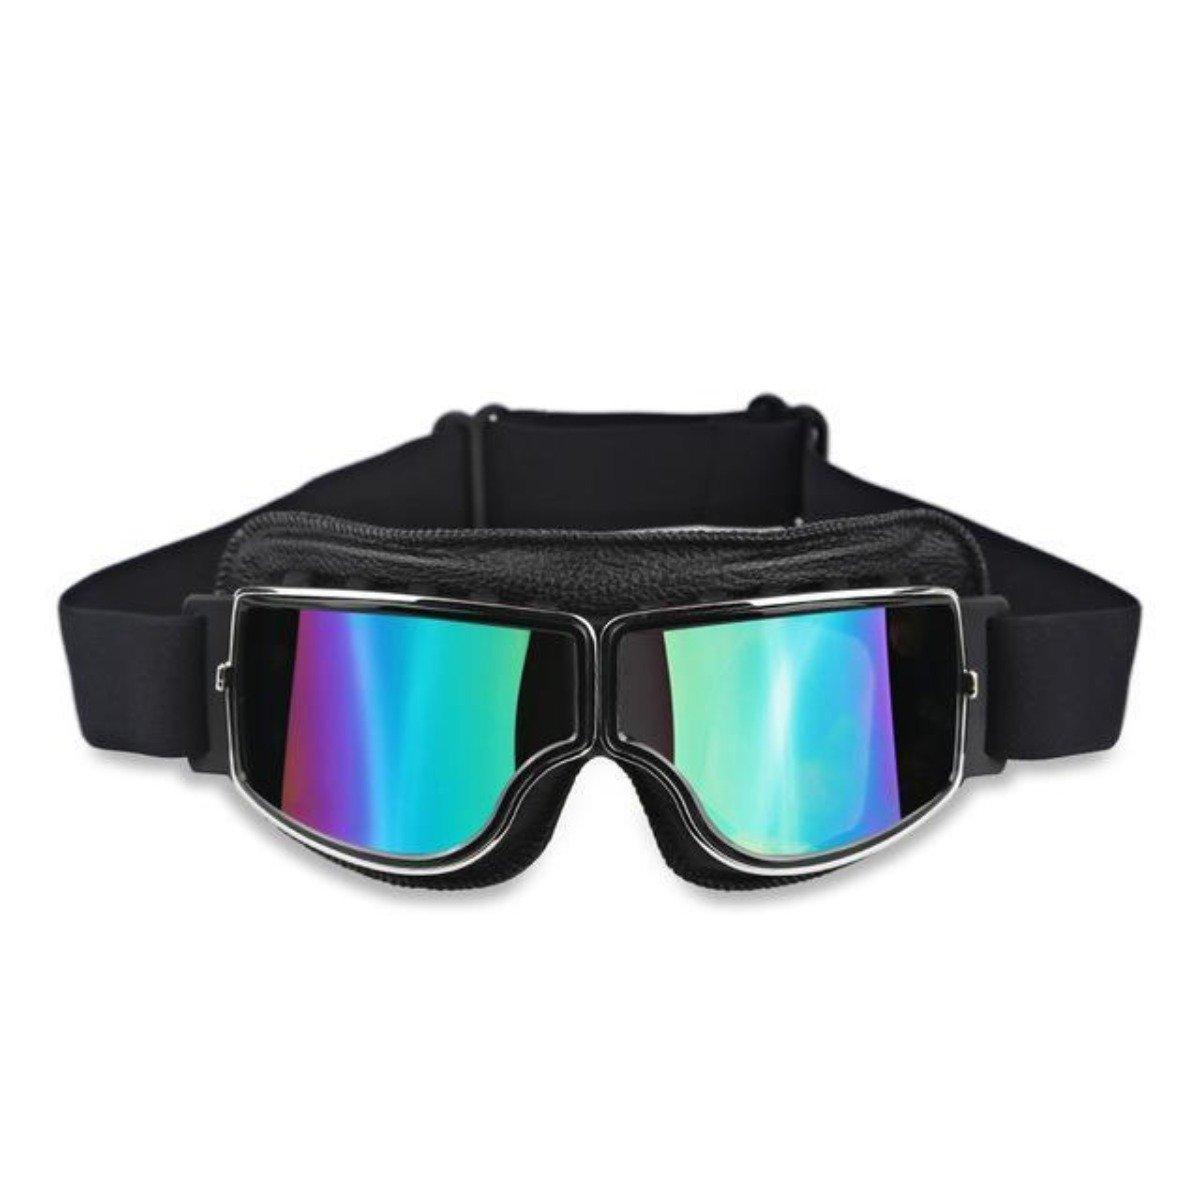 Vintage Aviator Motorcycle Goggles w/ Adjustable Strap, One Size, Black ABS Frame, Colorful Lens - American Legend Rider